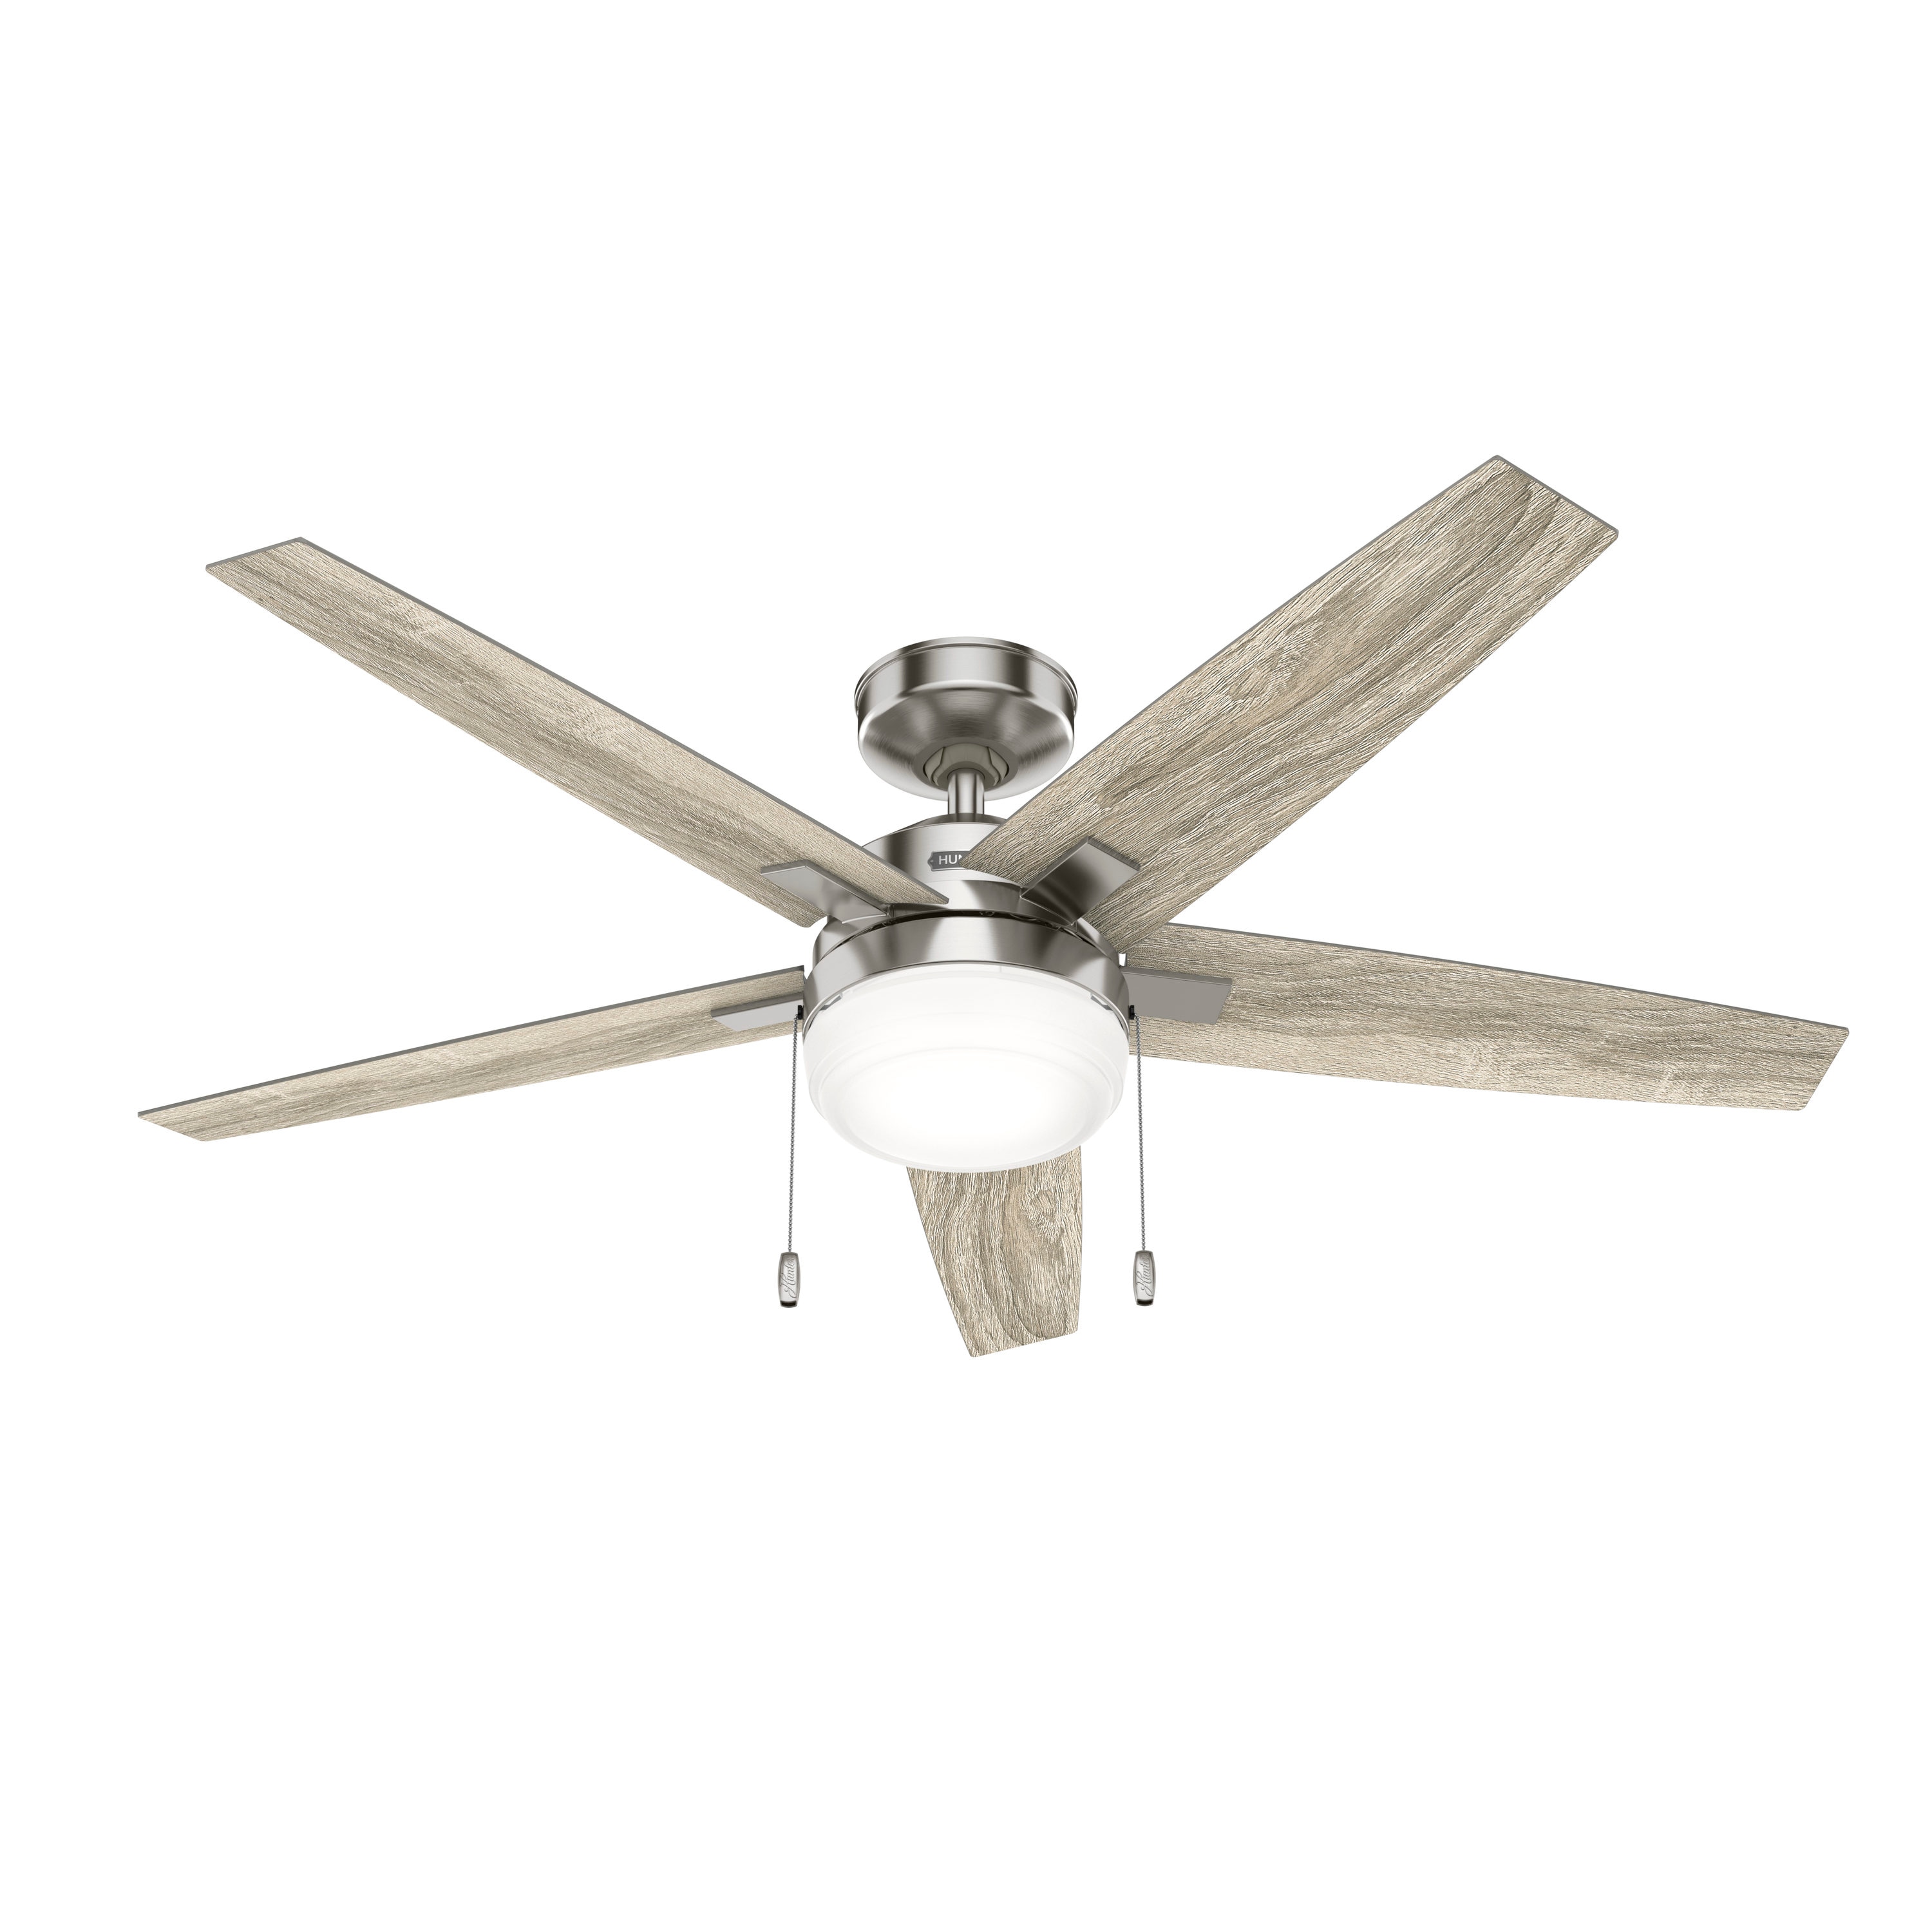 Hunter Khamsin 52 In Brushed Nickel Indoor Ceiling Fan With Light 5 Blade The Fans Department At Lowes Com